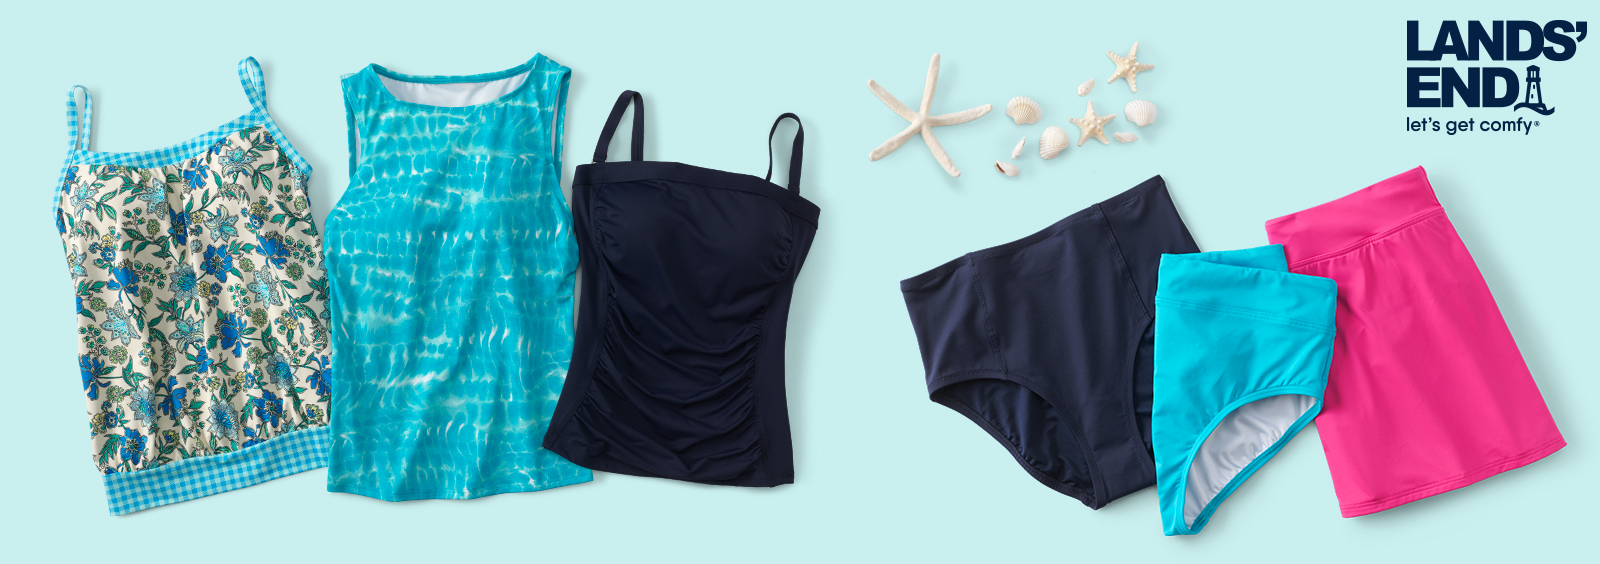 11 Swimsuit Styles That Can Elongate Your Torso